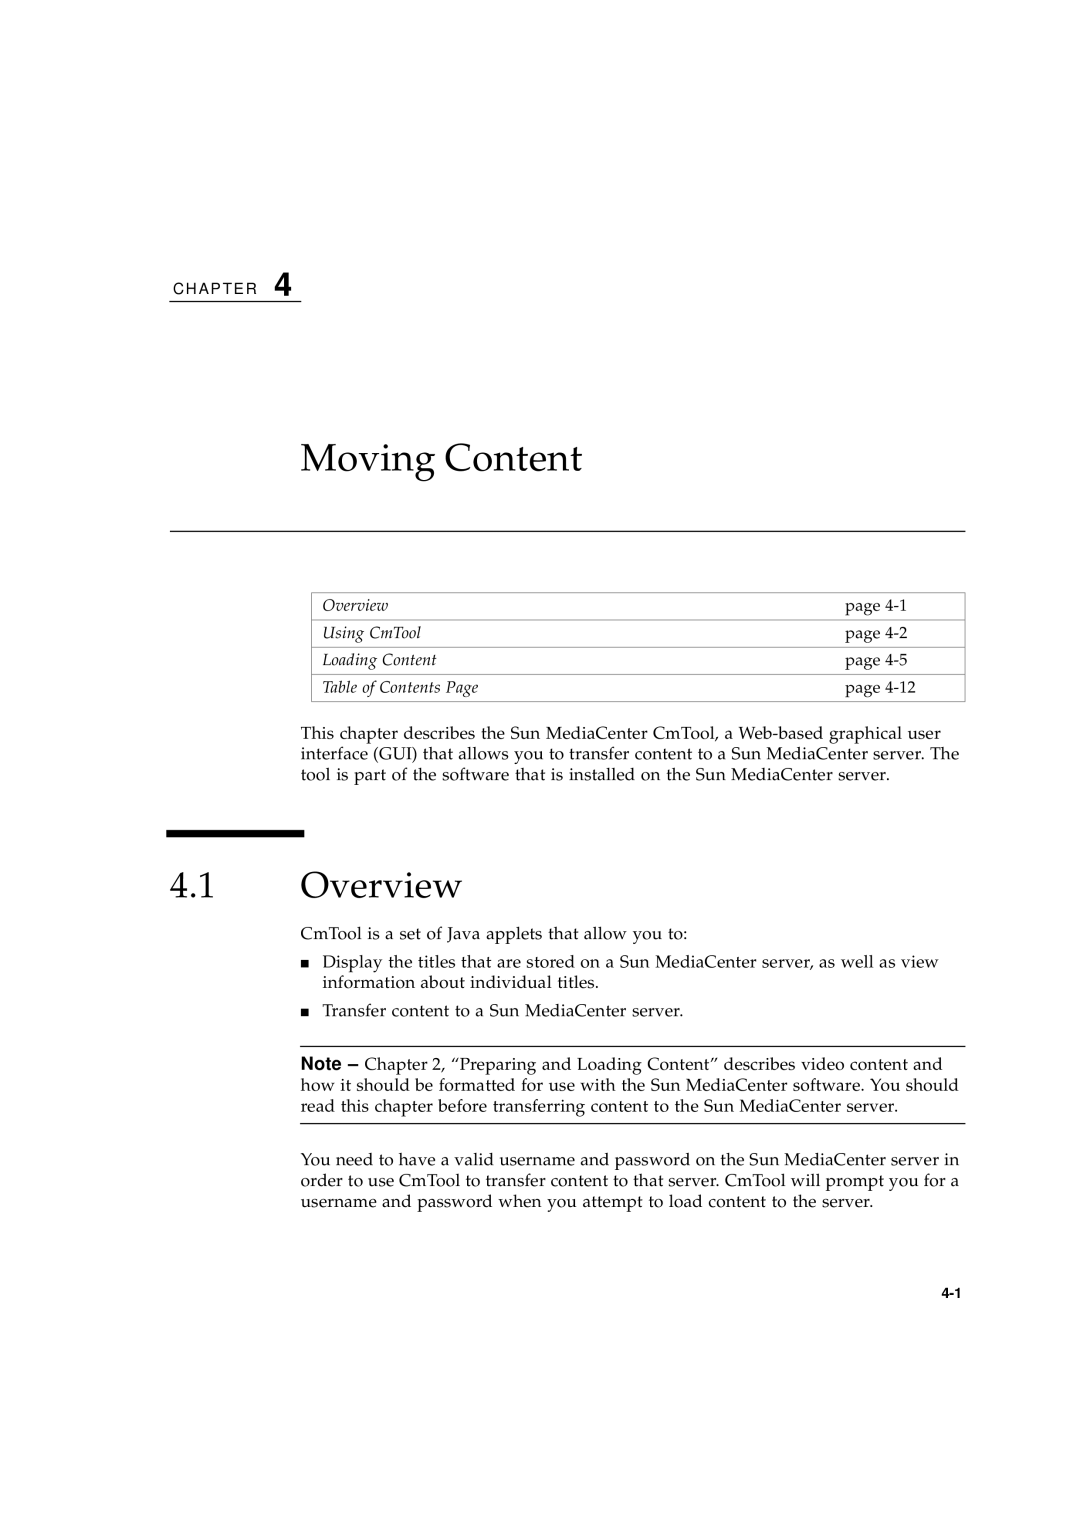 Sun Microsystems 2.1 manual Moving Content, Overview 